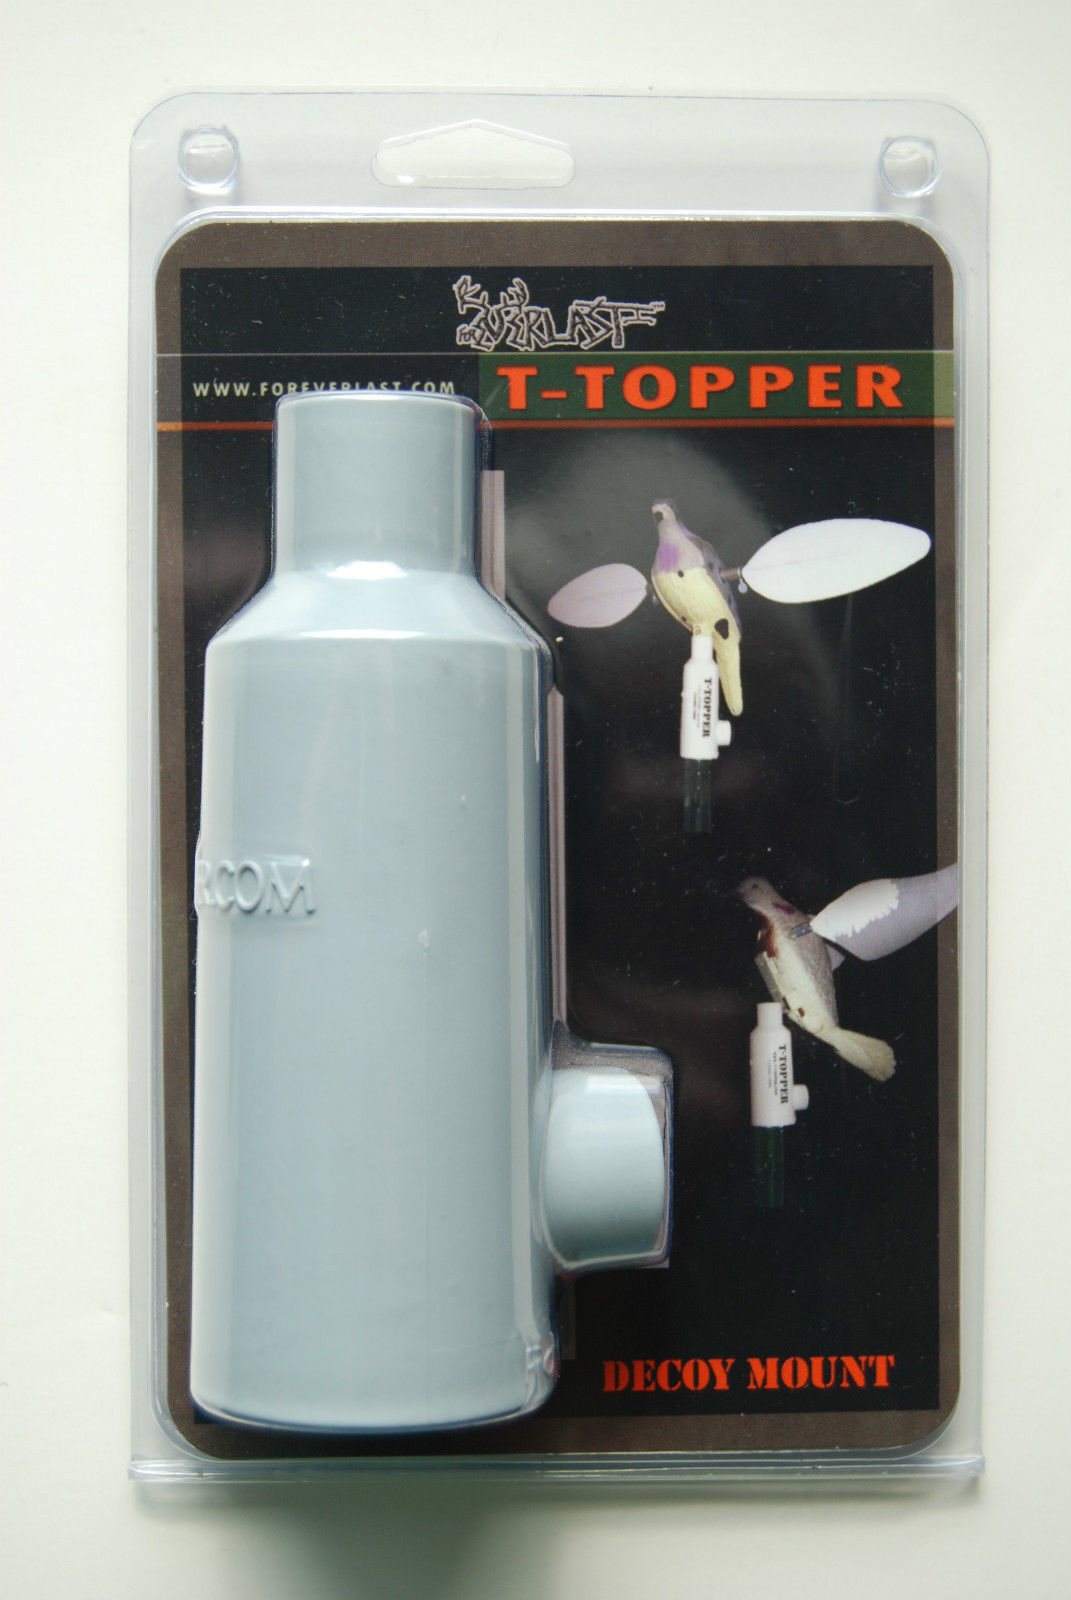  Foreverlast T-Topper Dove and Duck Decoy Mount